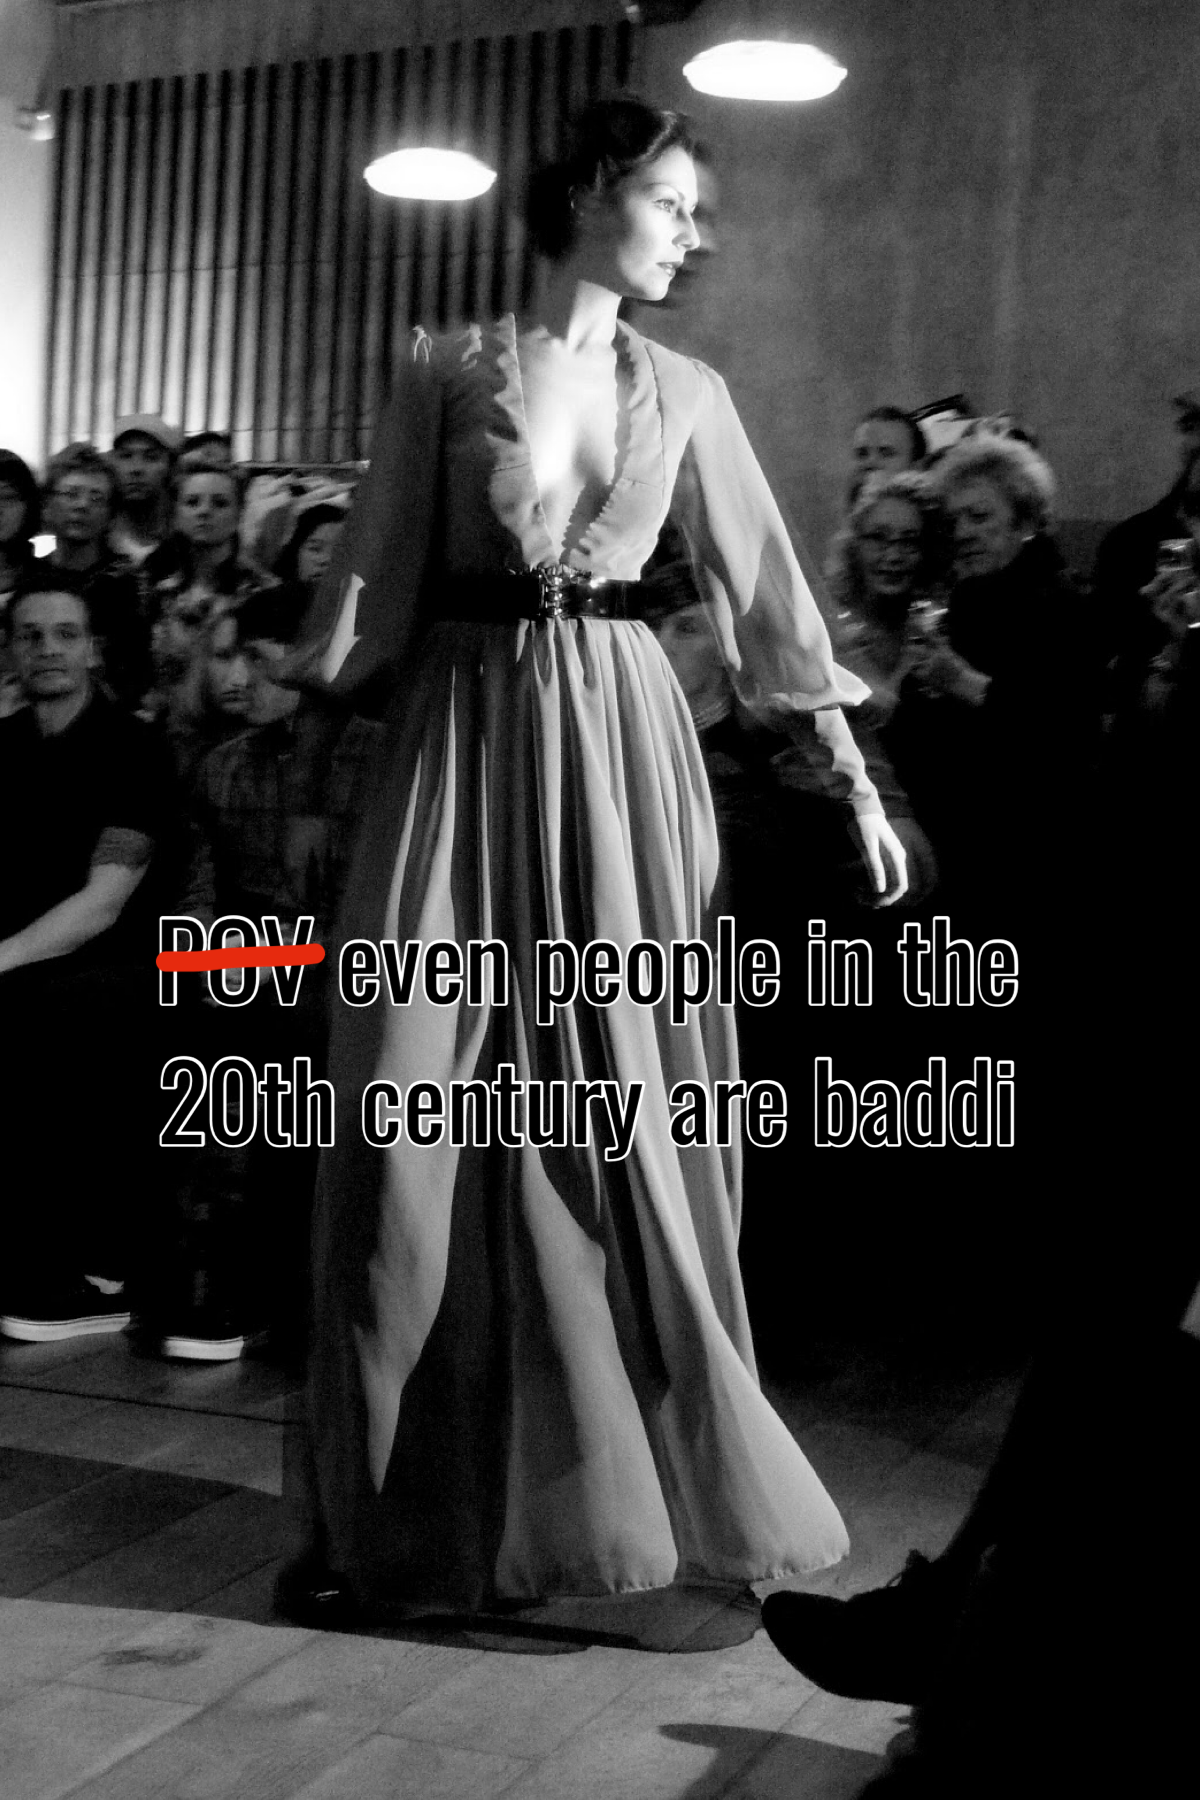 The people in the 20th century do be slaying tho- 
#vintage#fashion